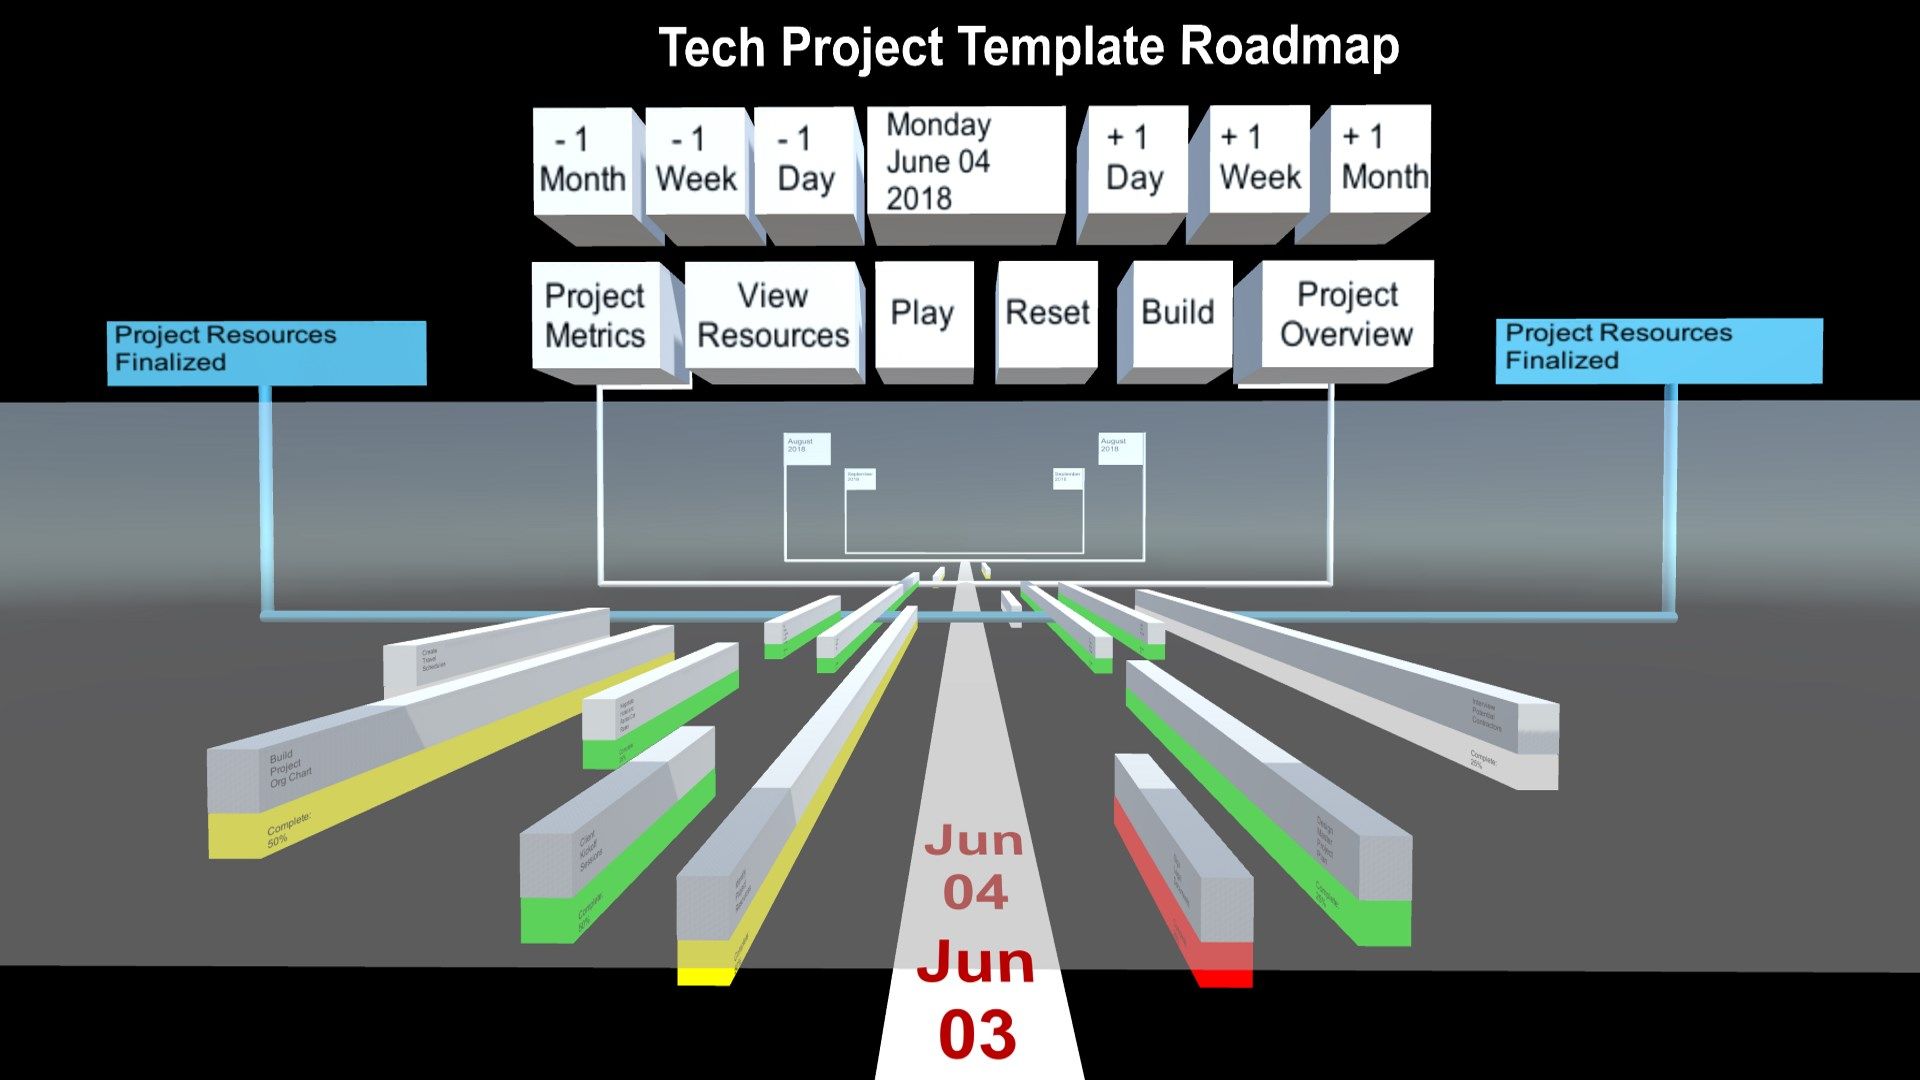 First Person Project Roadmap with all tasks and timelines.  Roadmap can be navigated manually with the cubes at the top of the screen, or played automatically with the "Play" button.